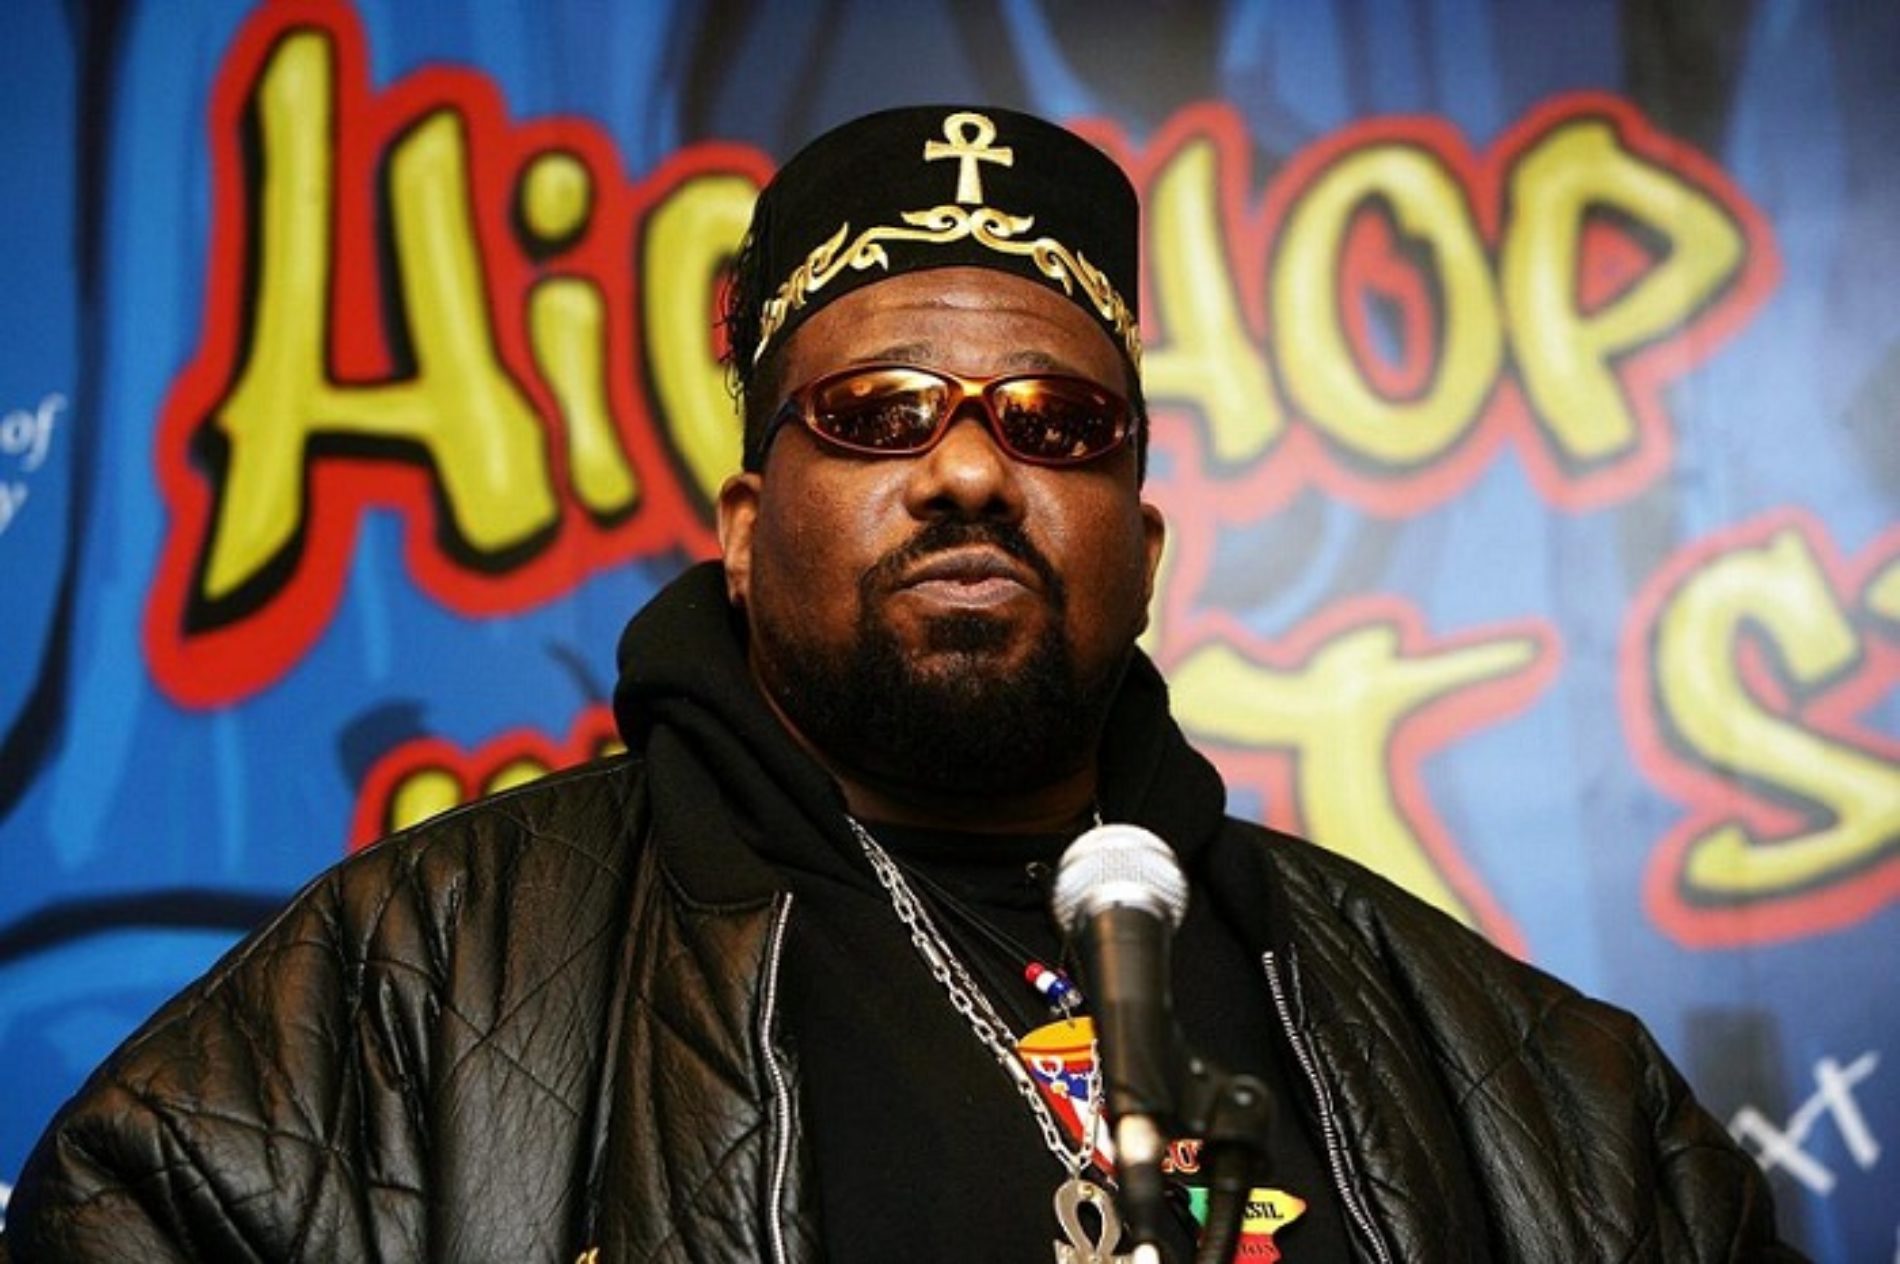 Afrika Bambaataa Faces Allegations of Sexual Abuse with Minor